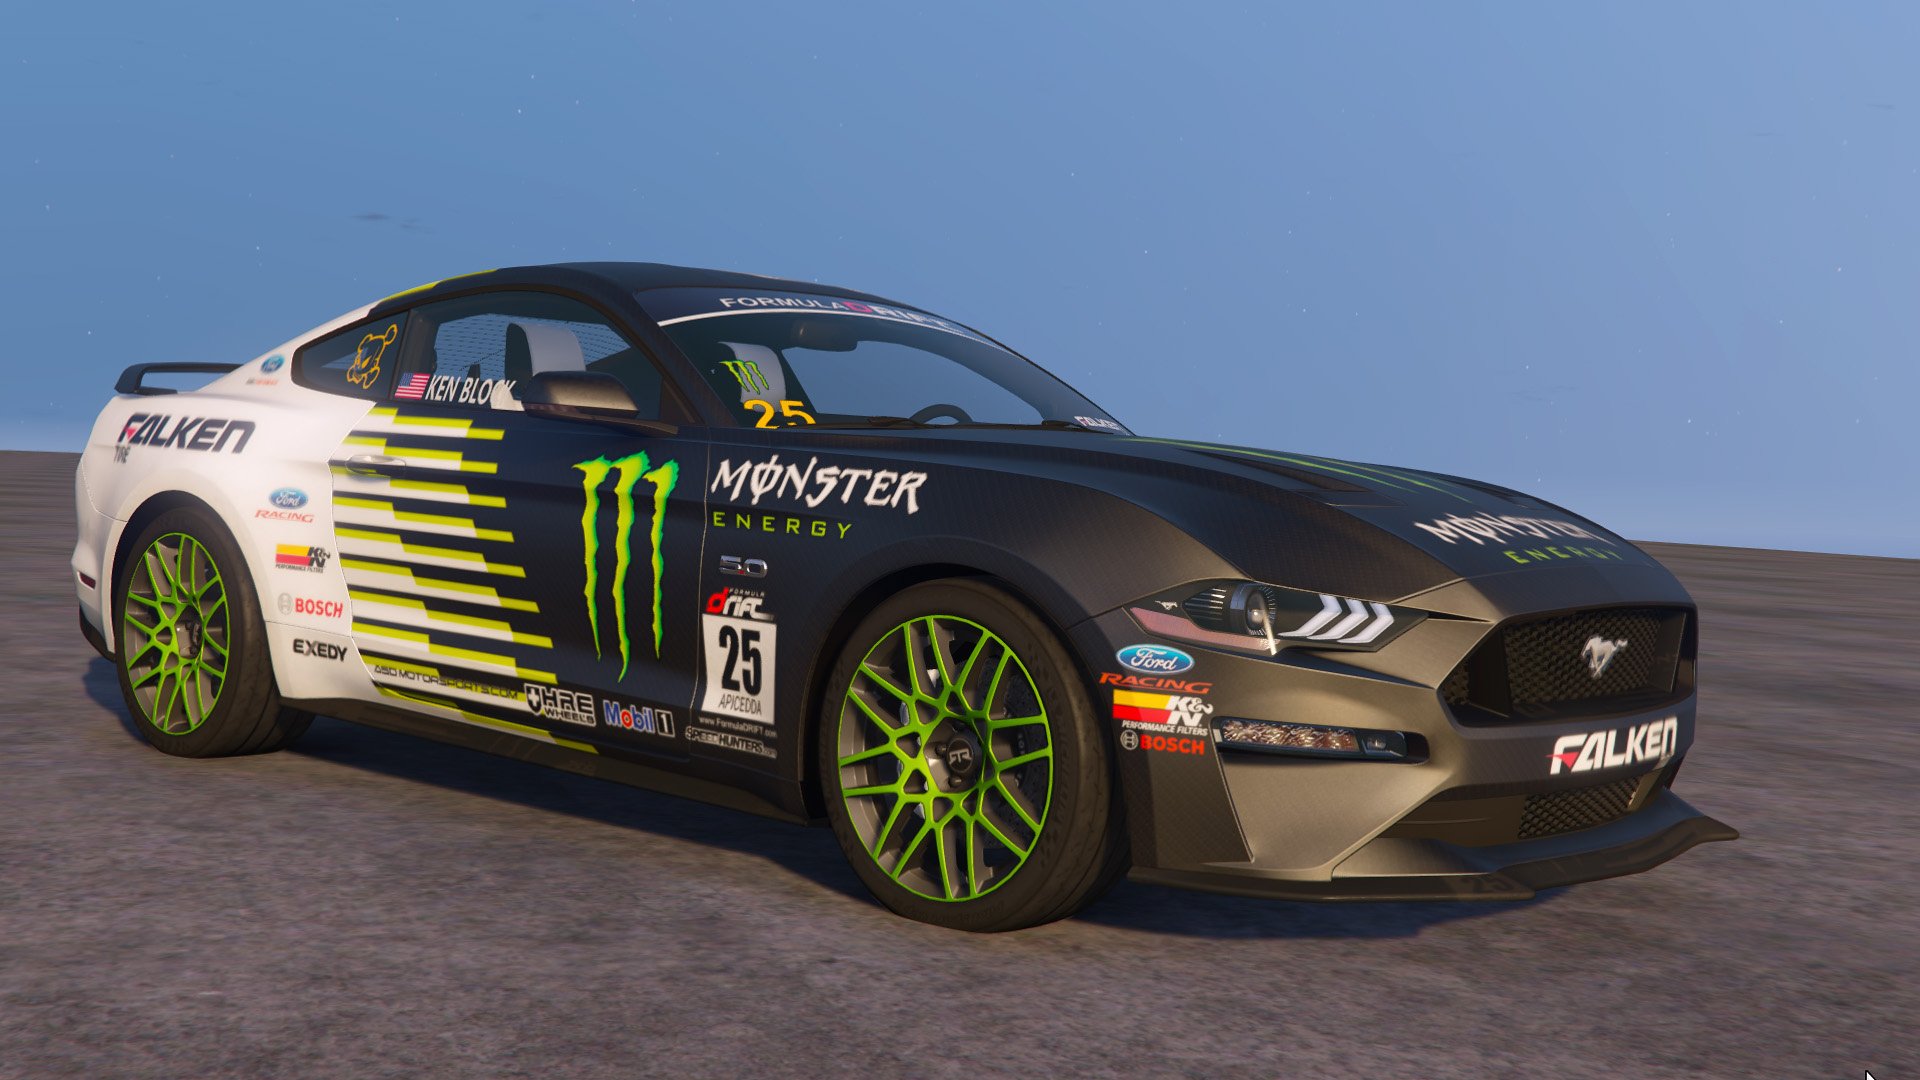 2019 Ford Mustang GT Monster Energy livery.